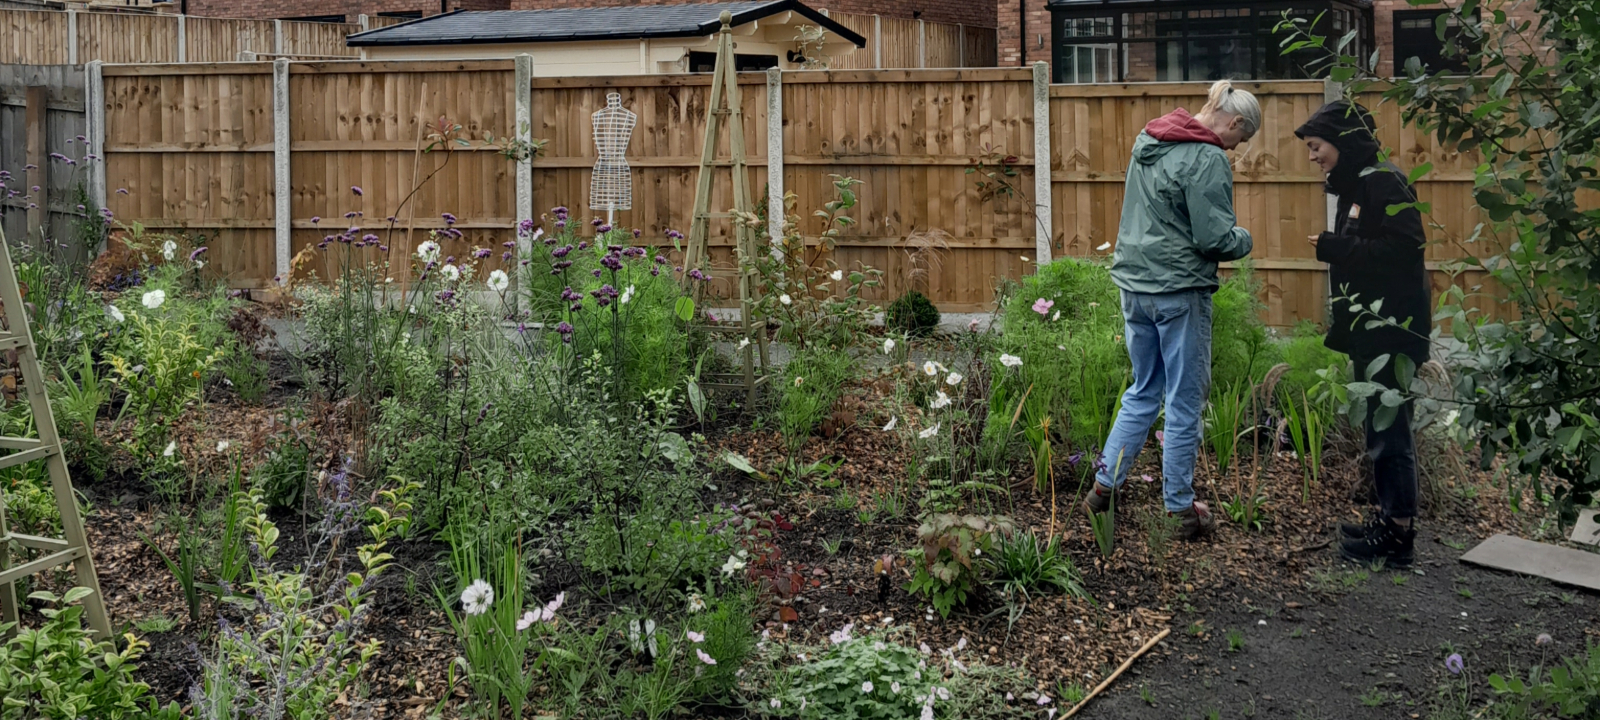 Two people at community garden developing as part of green spaces fund